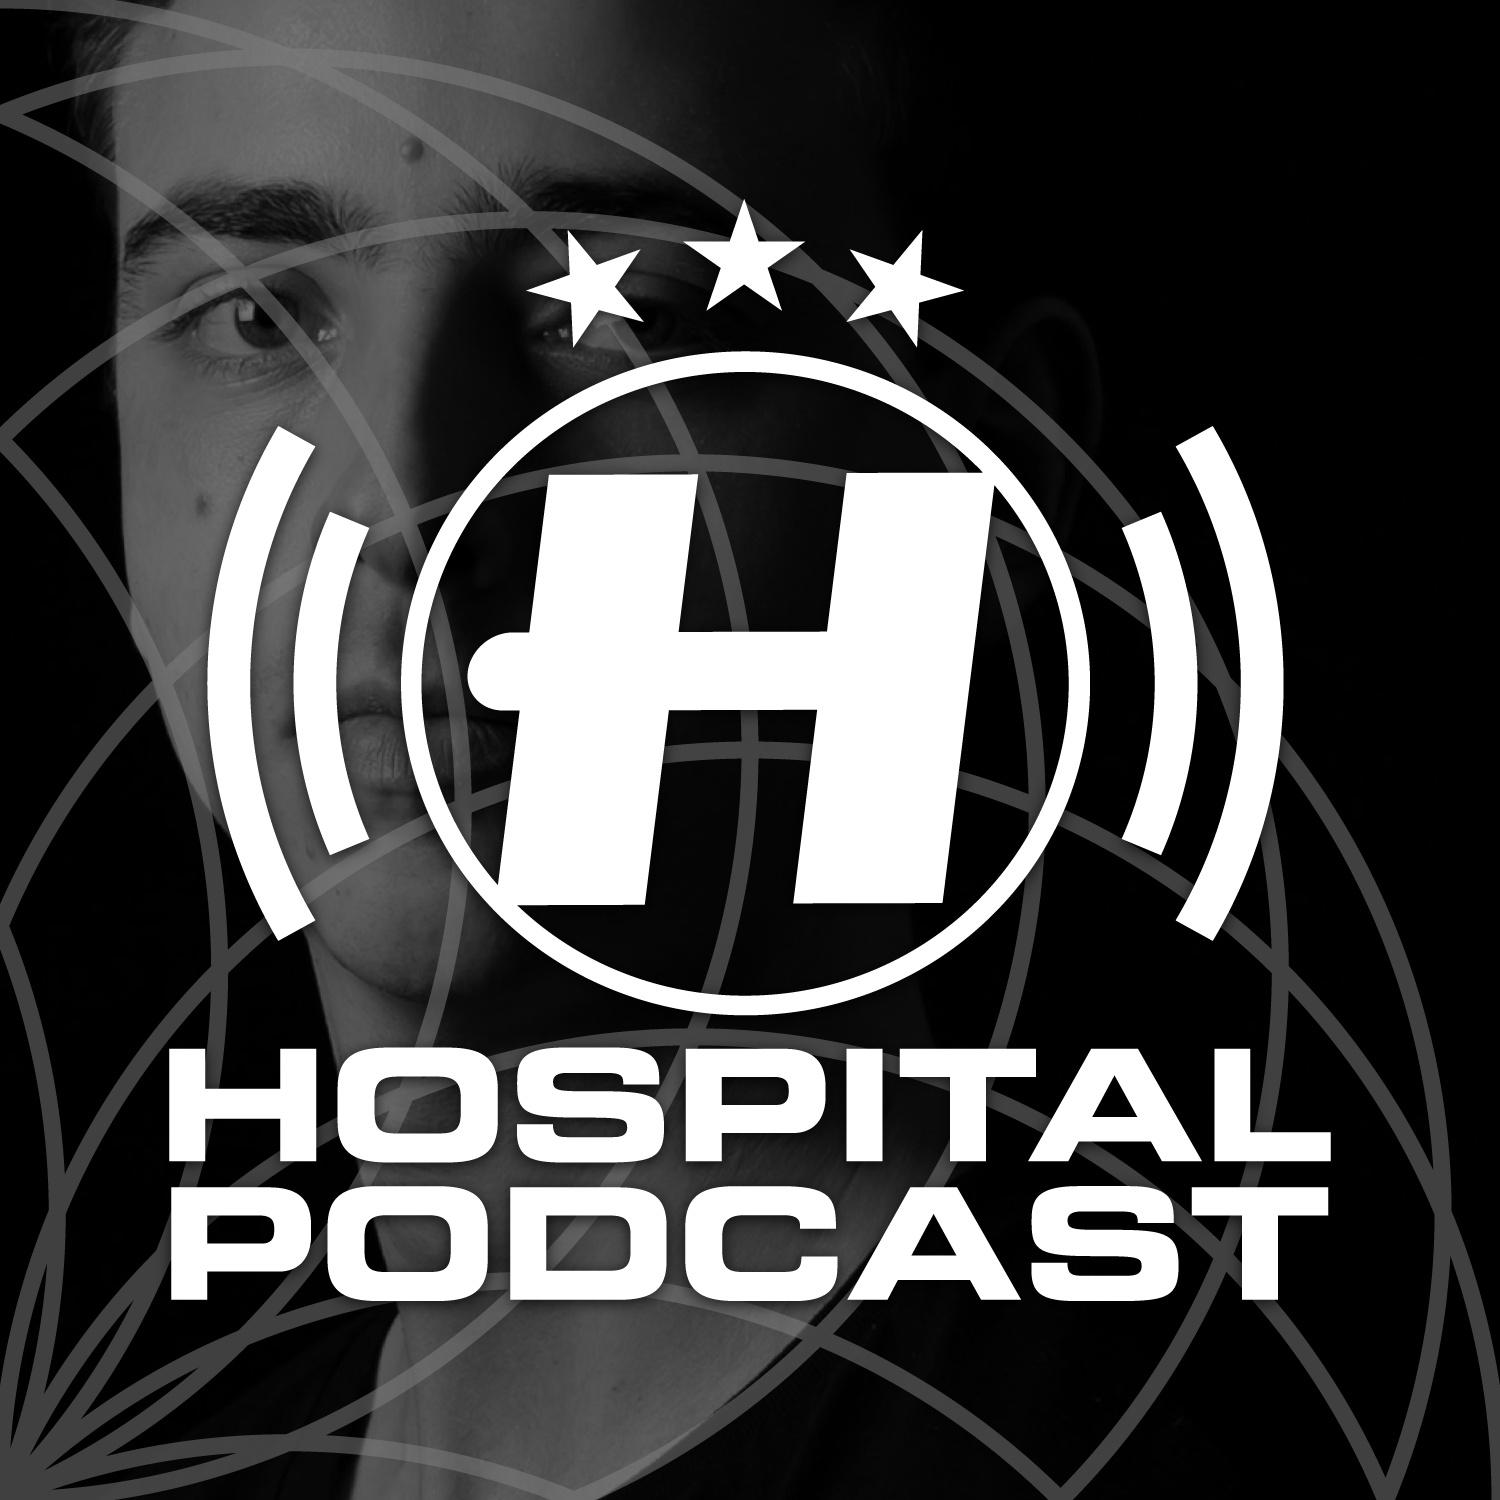 Hospital Podcast 429 - Whiney's Bubblers Takeover Artwork